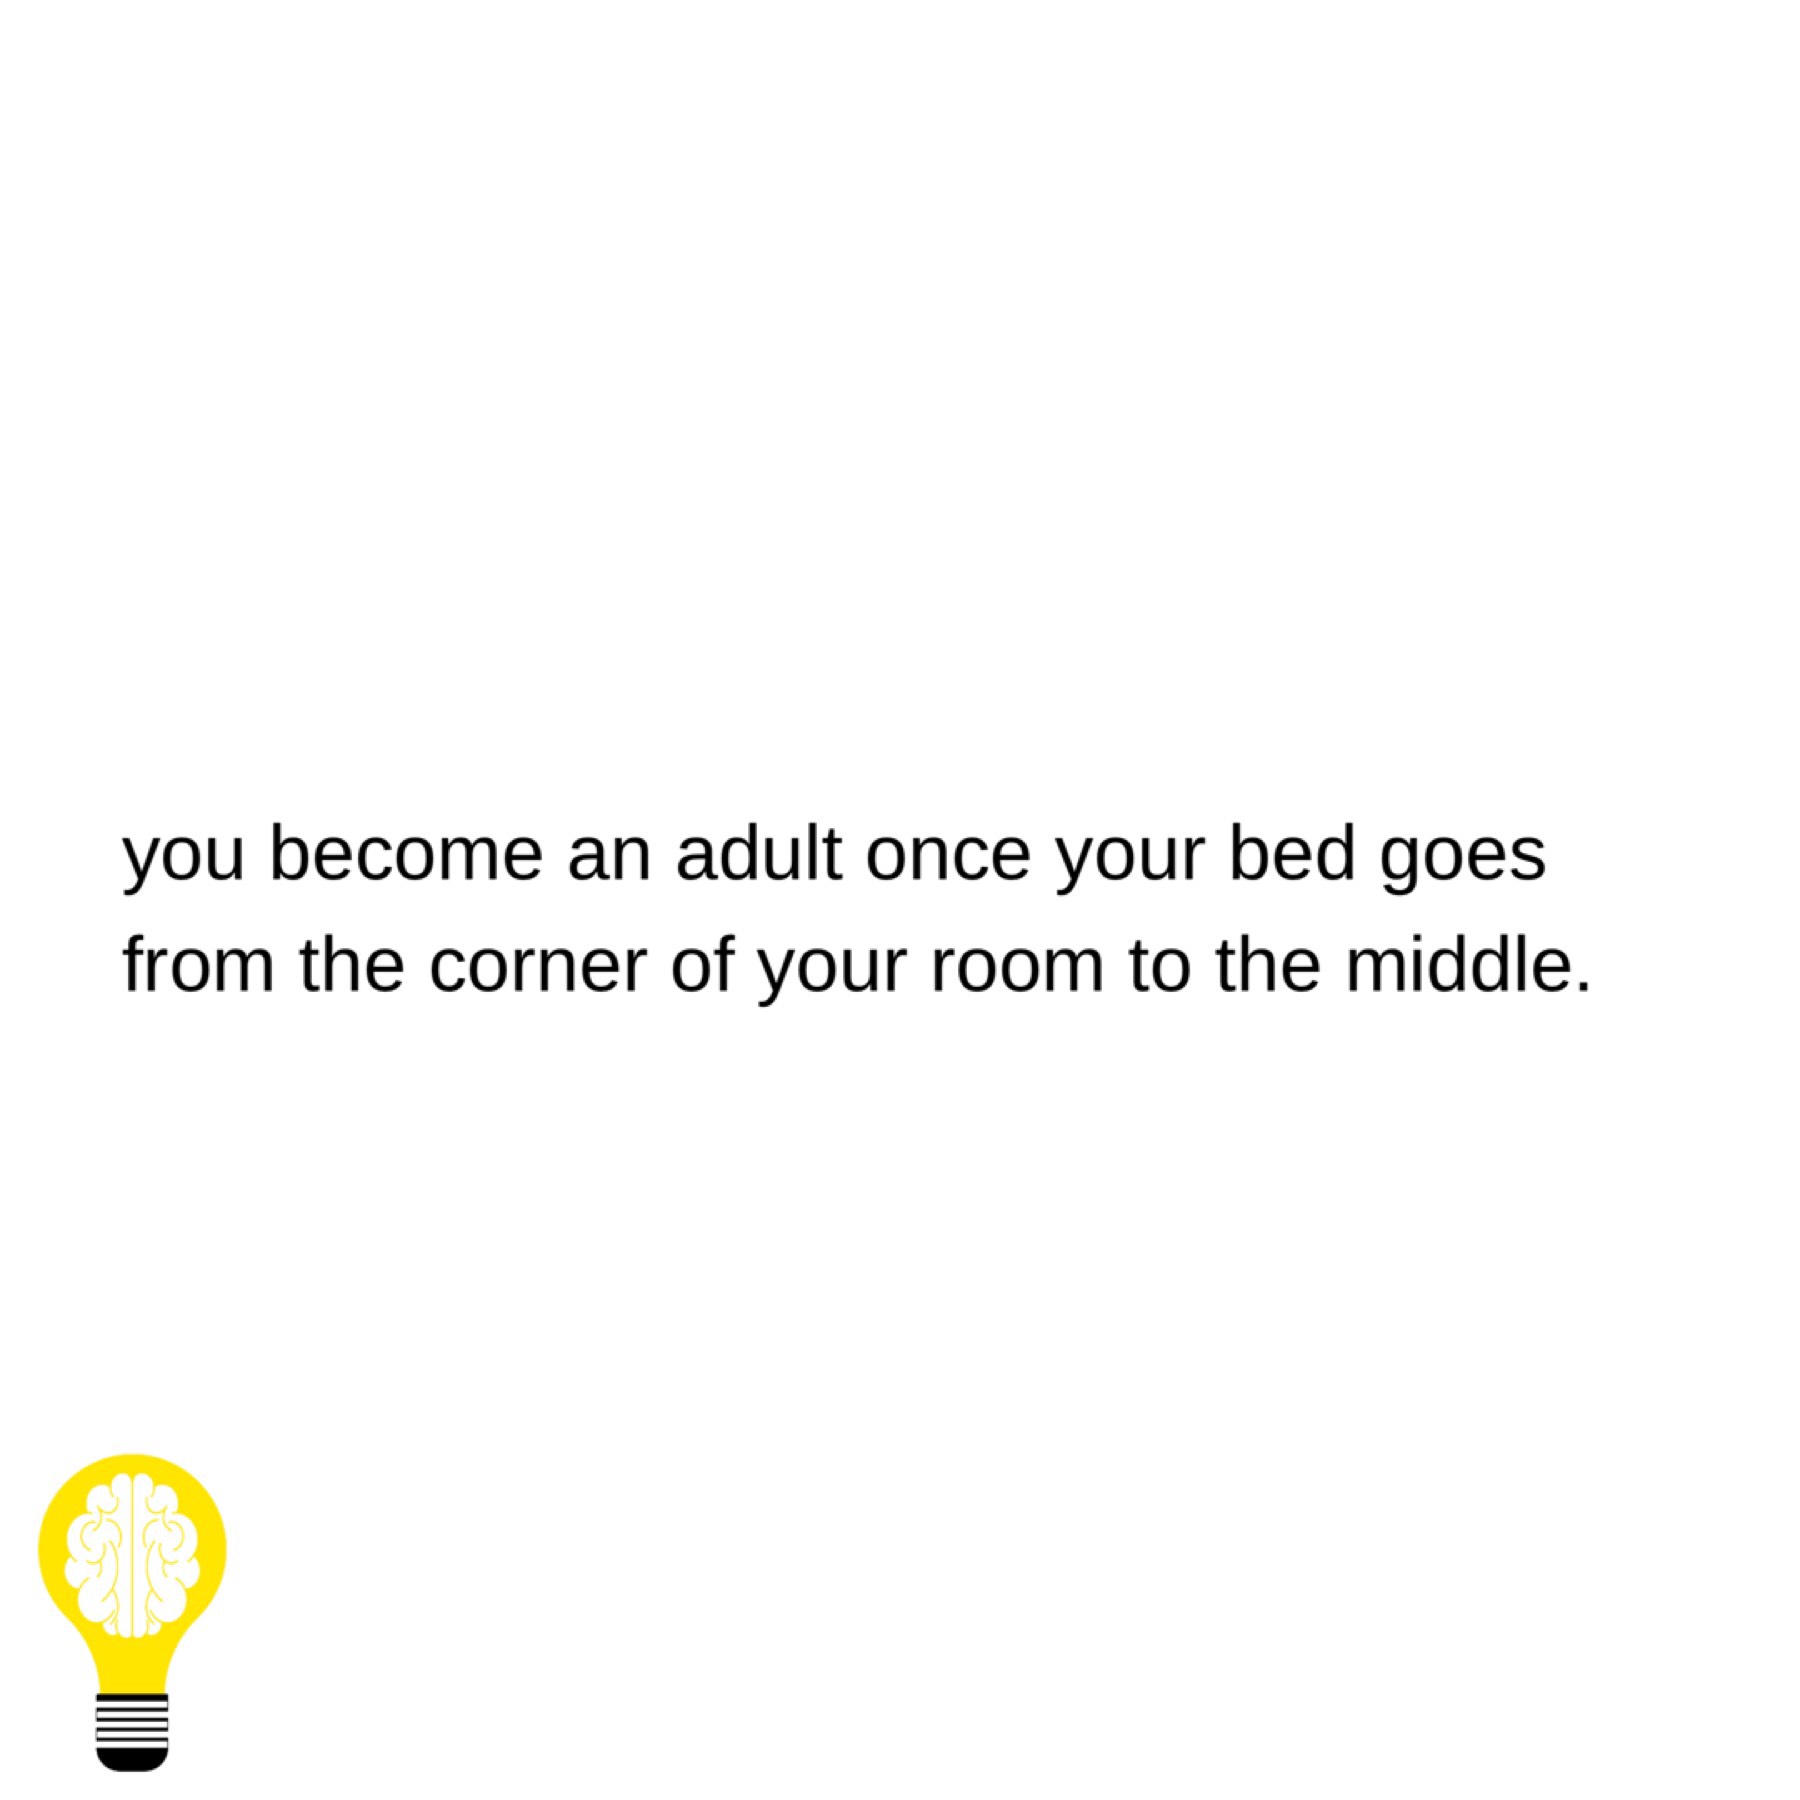 tap for question 🛏

is your bed against a wall or
in the middle of your room?